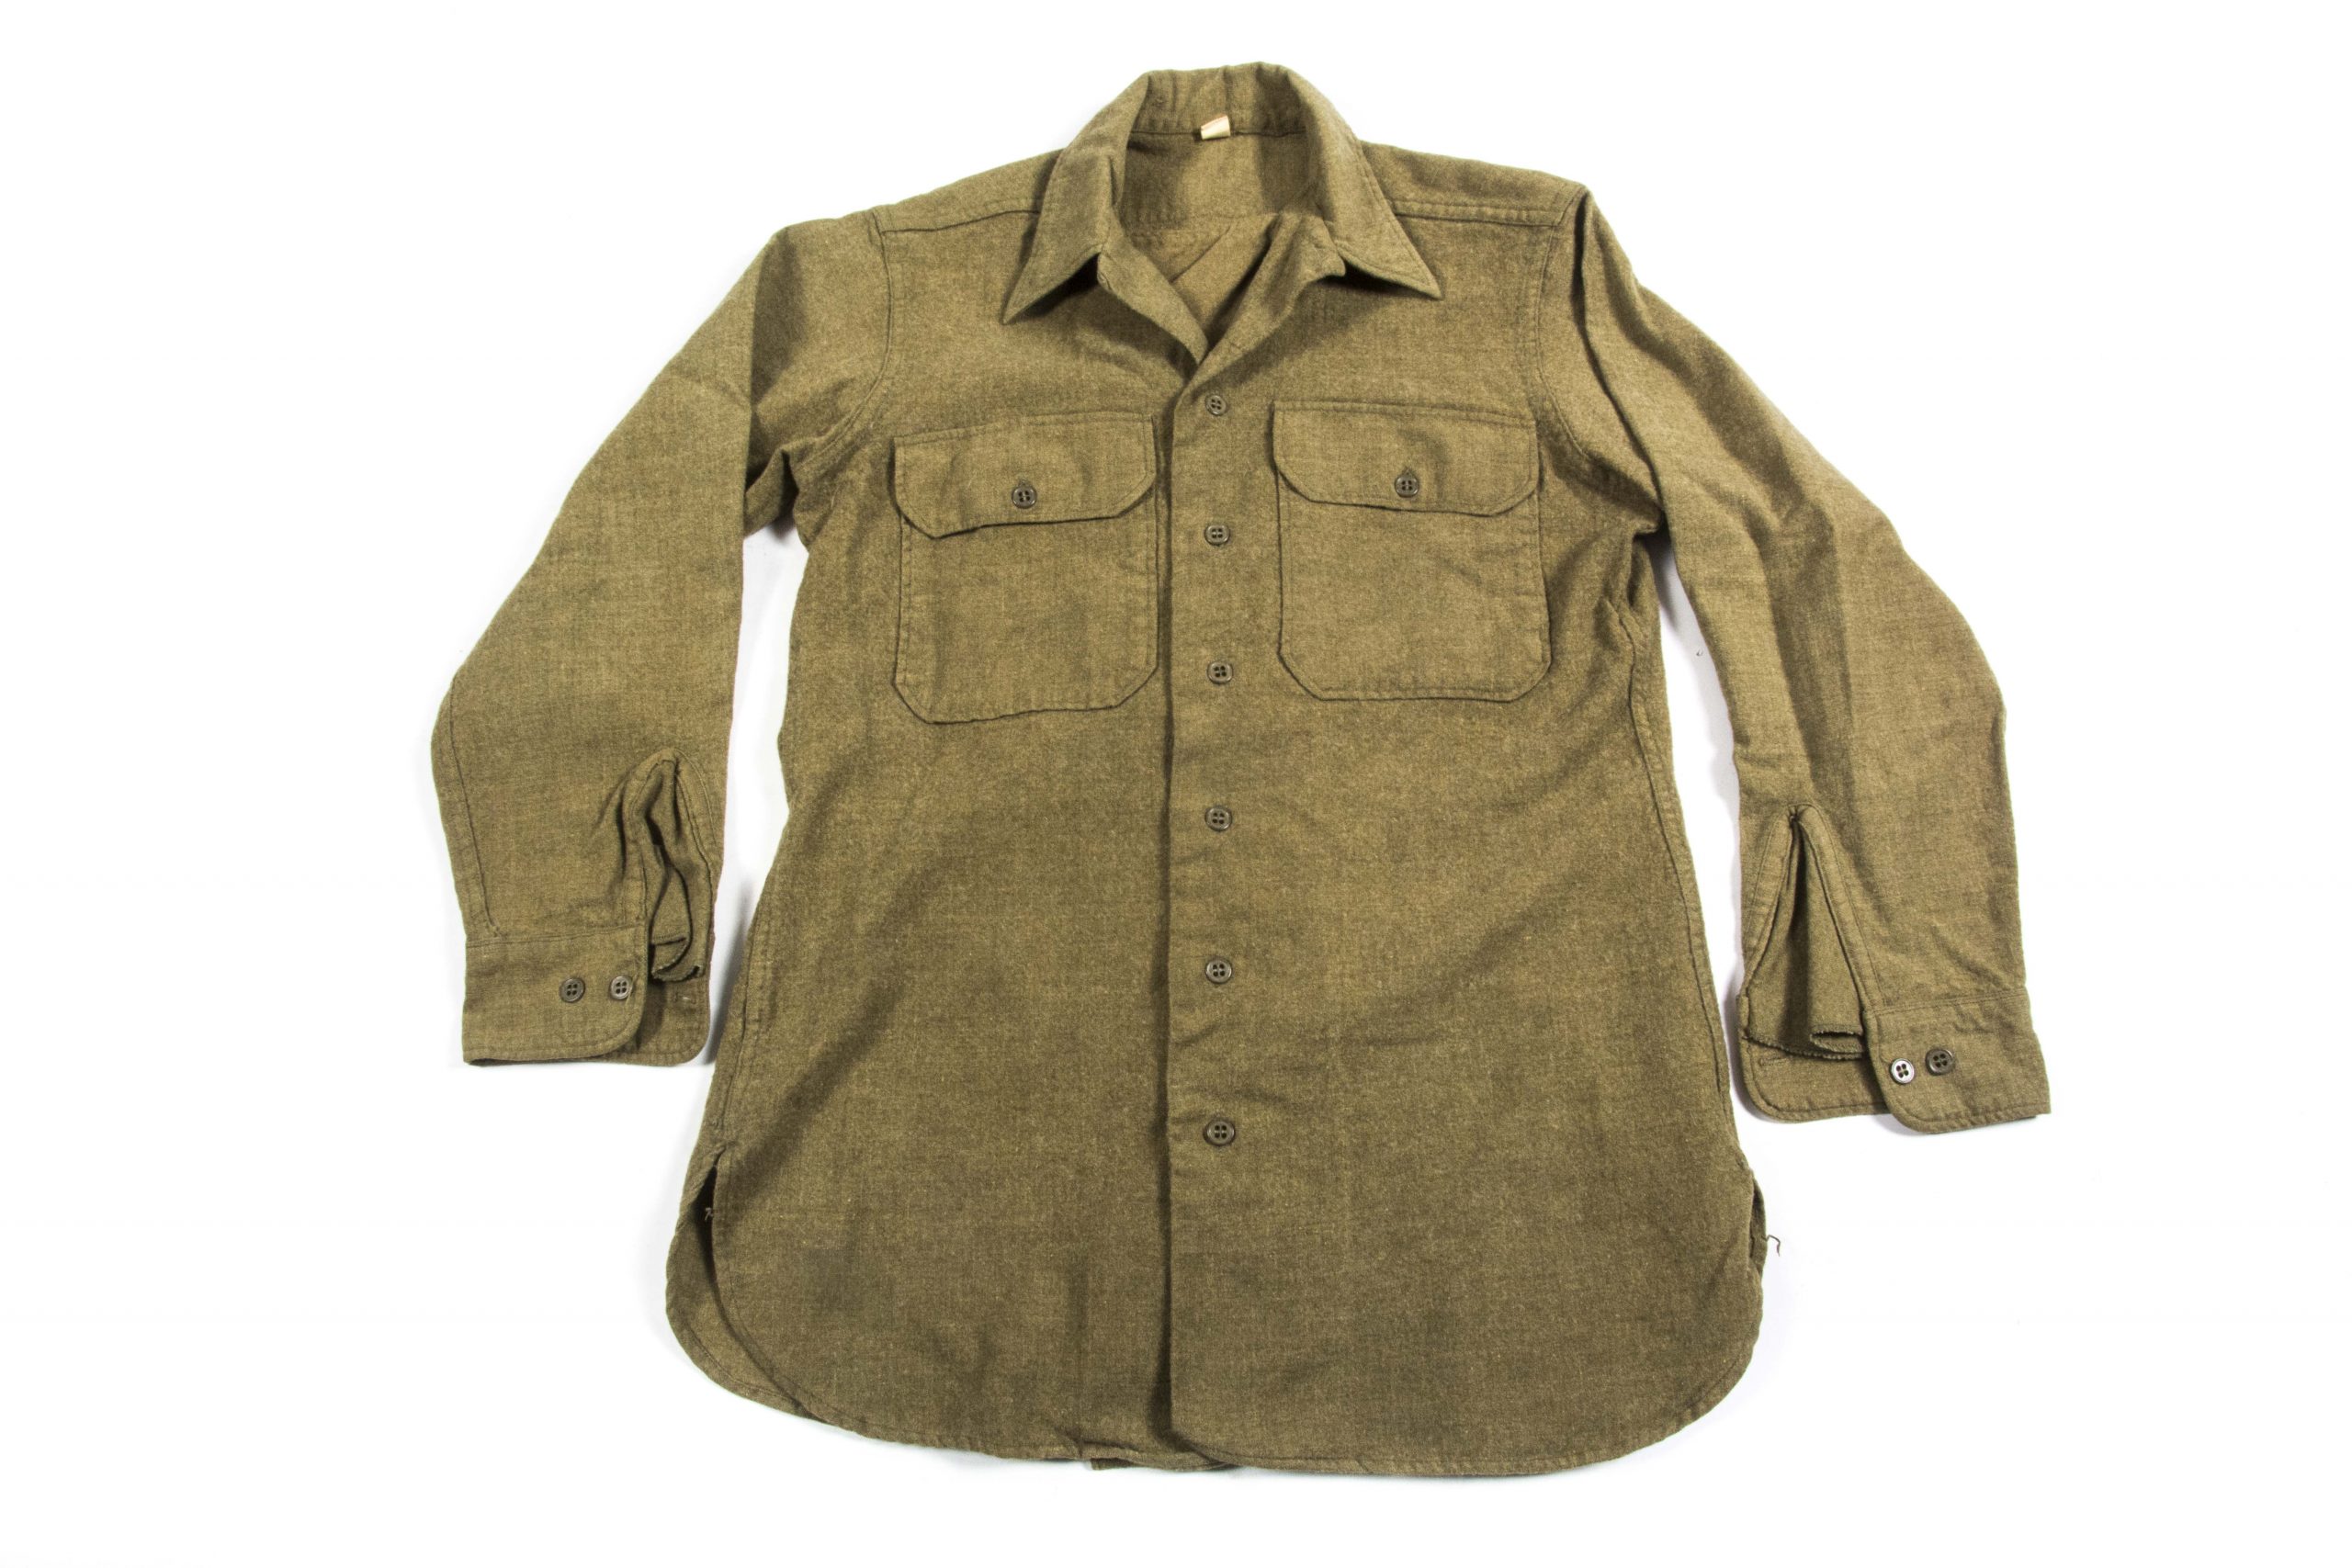 US Wool shirt, special size 15-32 – fjm44